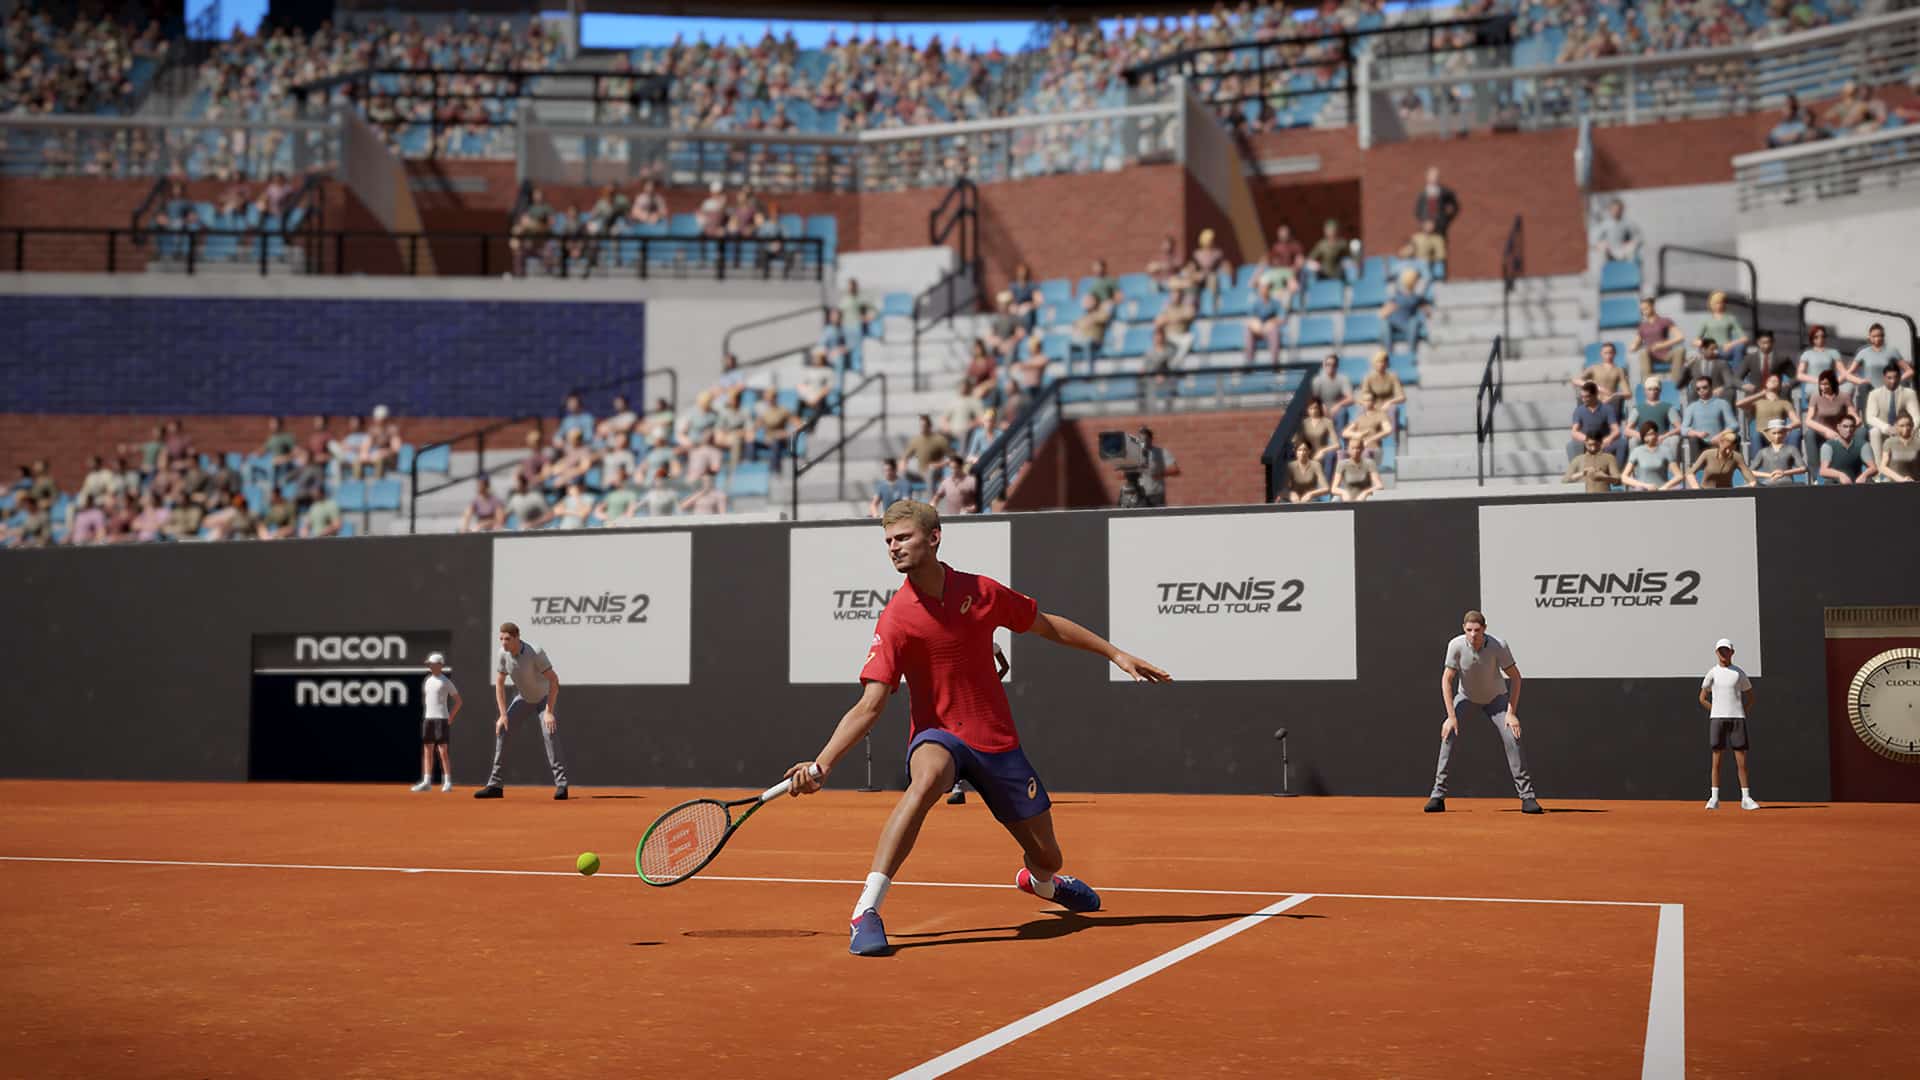 tennis world tour 2 can't see ball